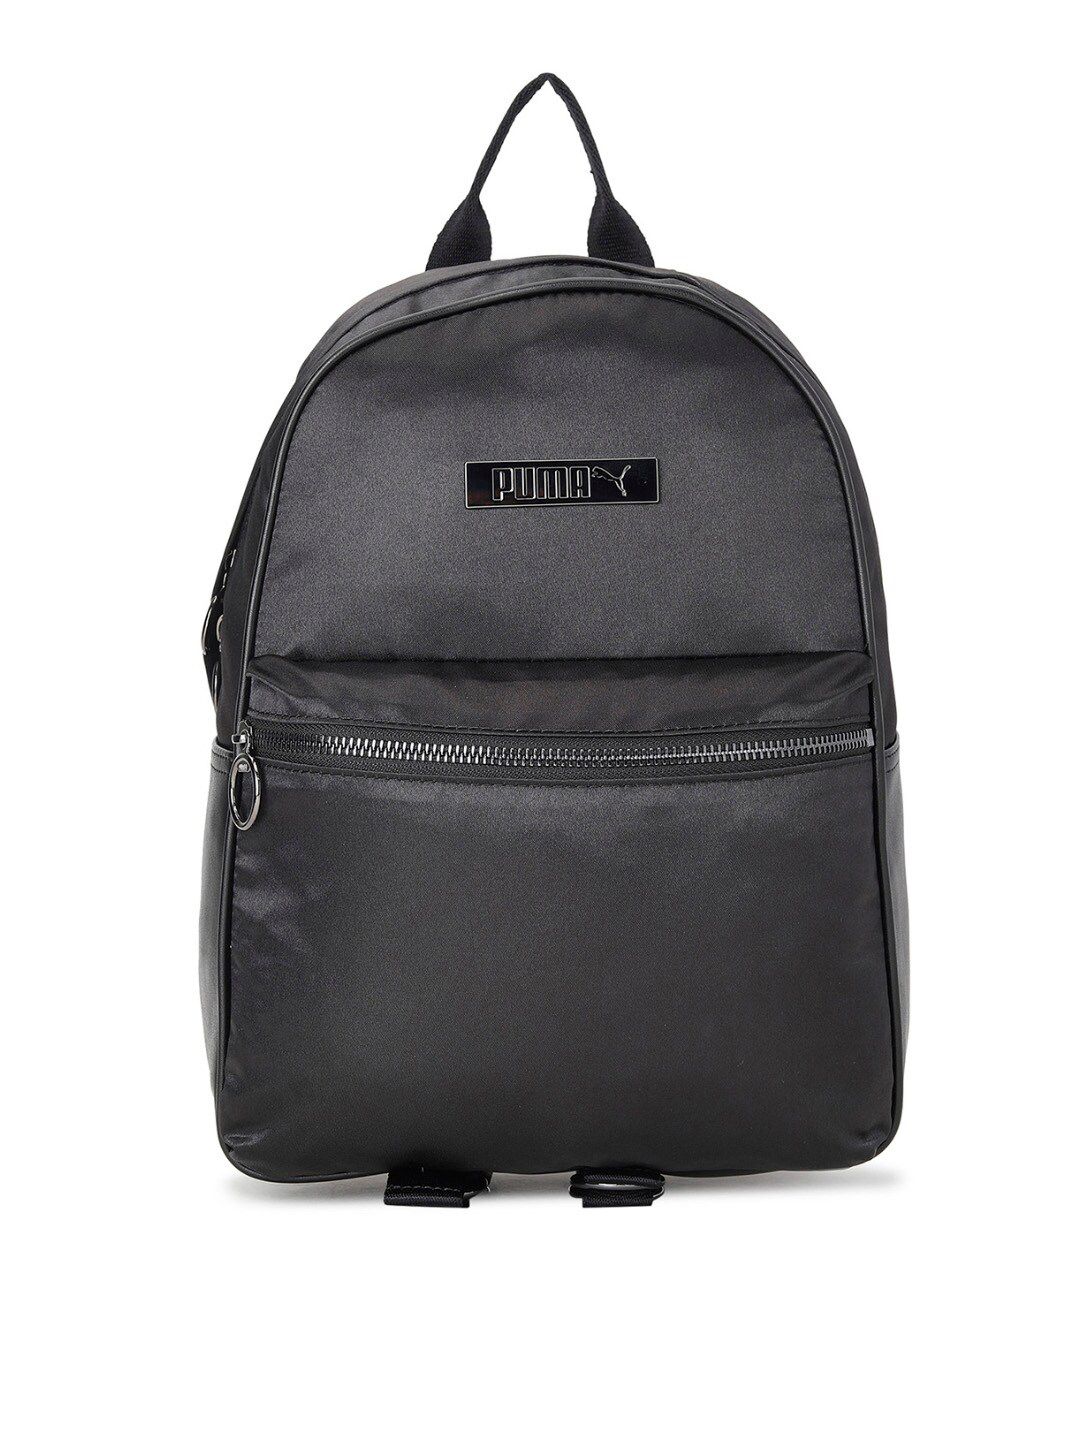 Puma Women Black Solid Backpack Price in India